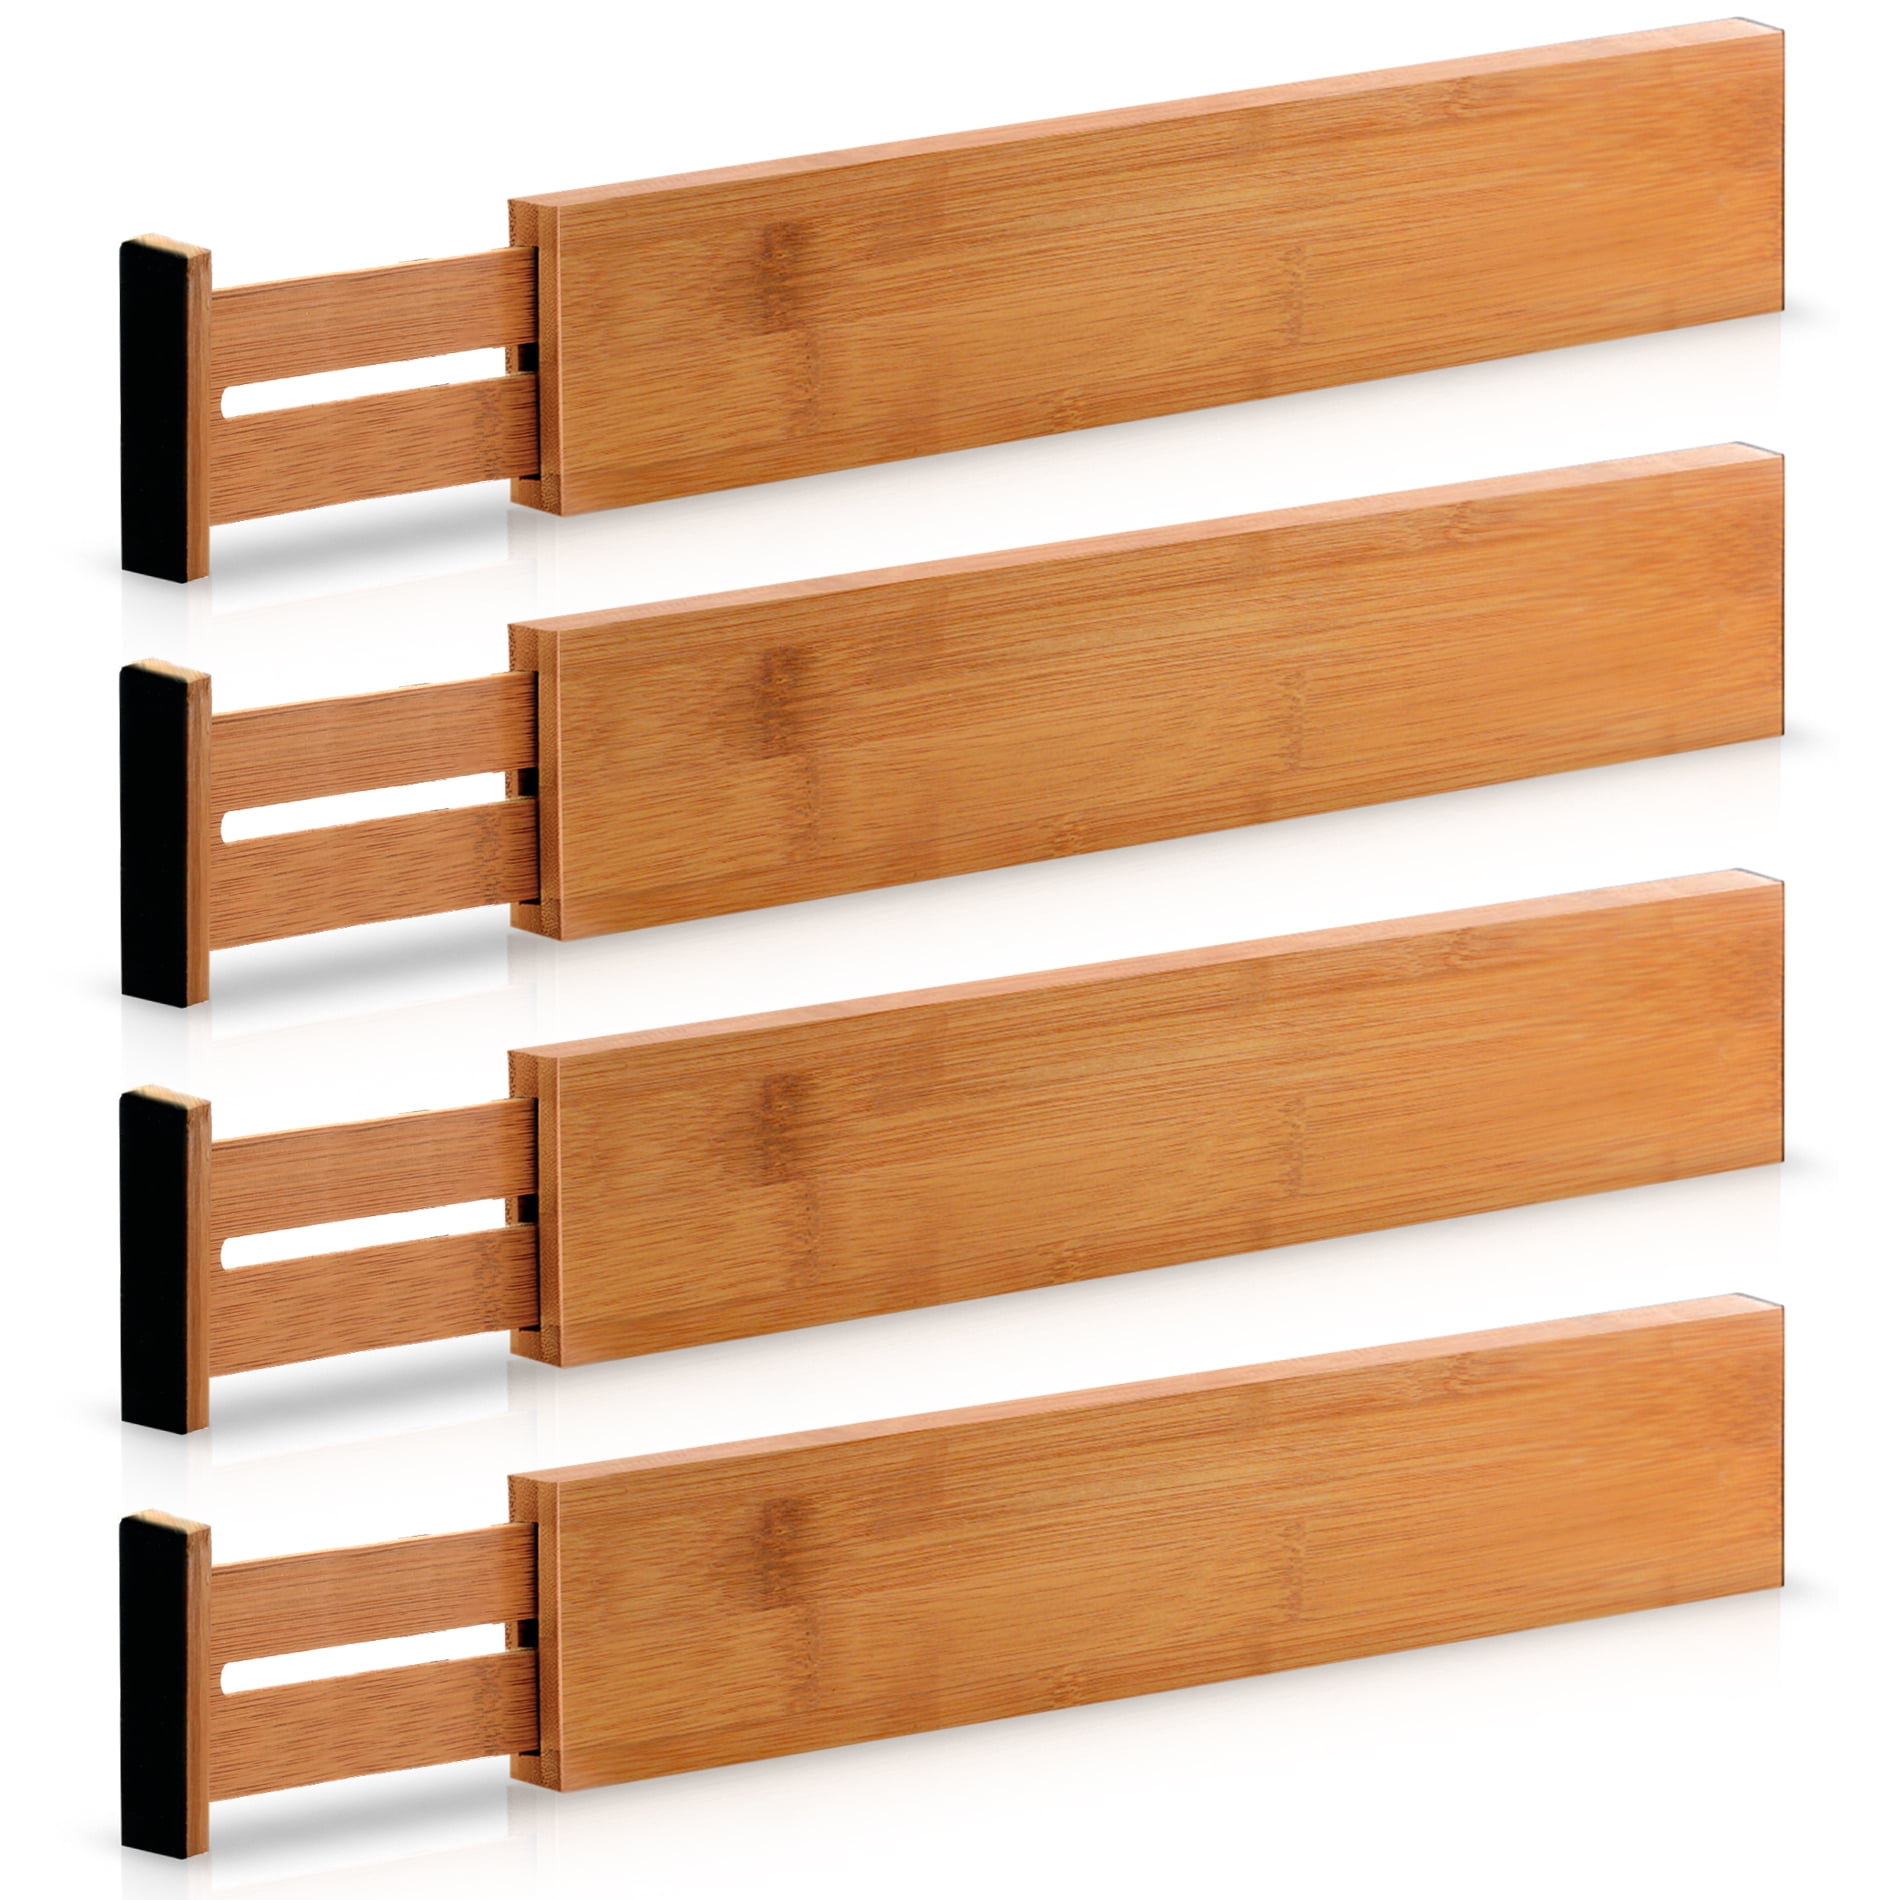 Details about   4 Pack Drawer Dividers Bamboo Separators Organization Expandable Organizers NEW 